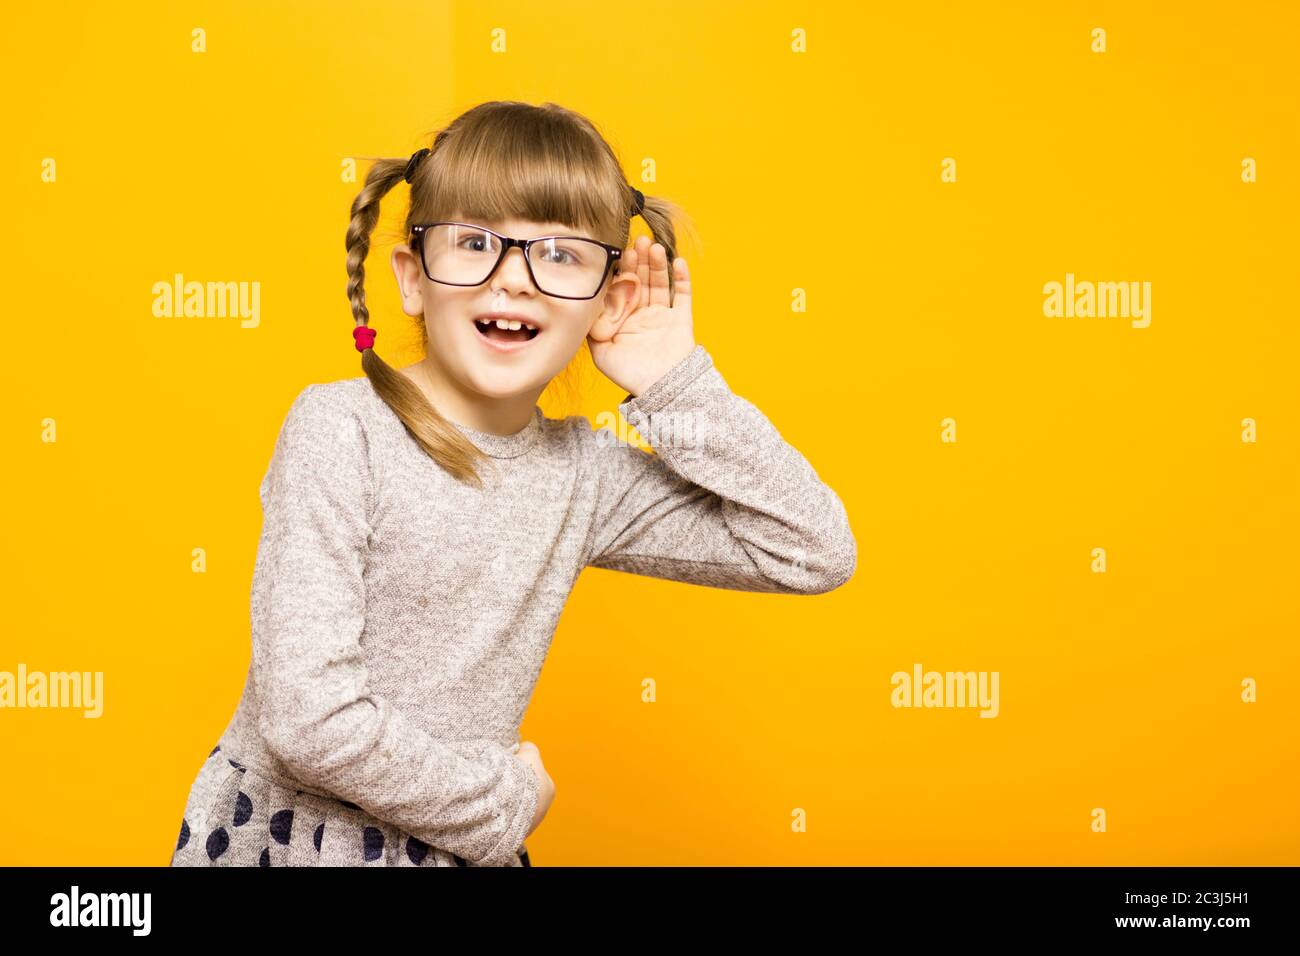 Little child girl journalist in glasses with surprised euphoria face and funny pigtails listening to something holding his hand to ear isolated on yel Stock Photo